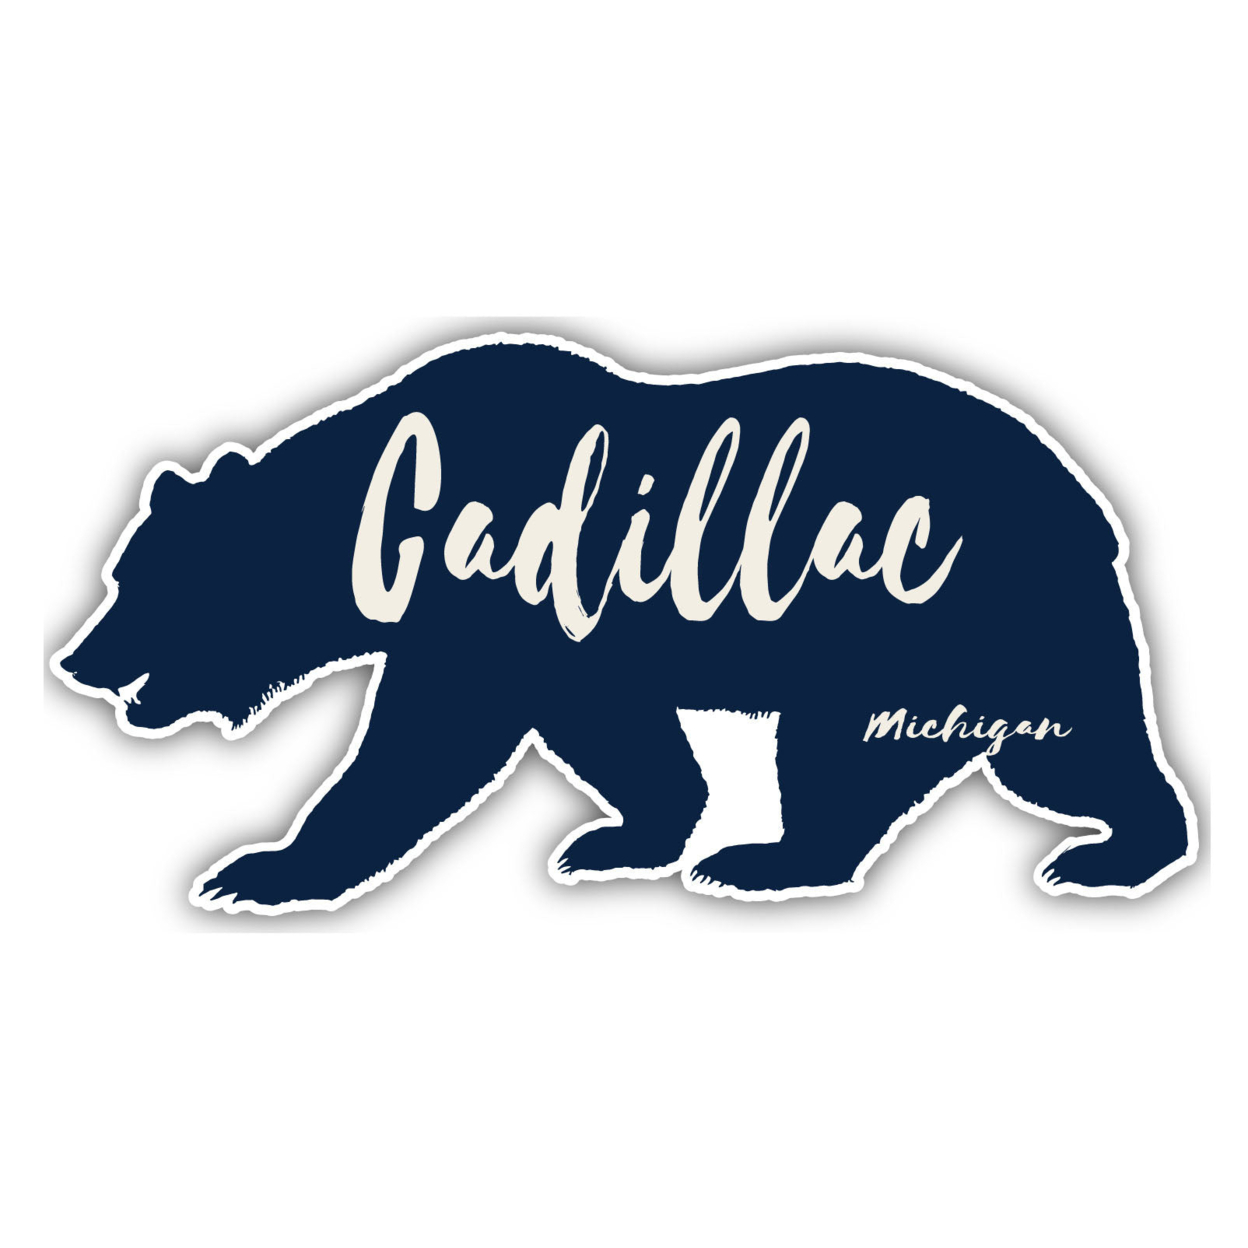 Cadillac Michigan Souvenir Decorative Stickers (Choose Theme And Size) - 4-Pack, 6-Inch, Bear